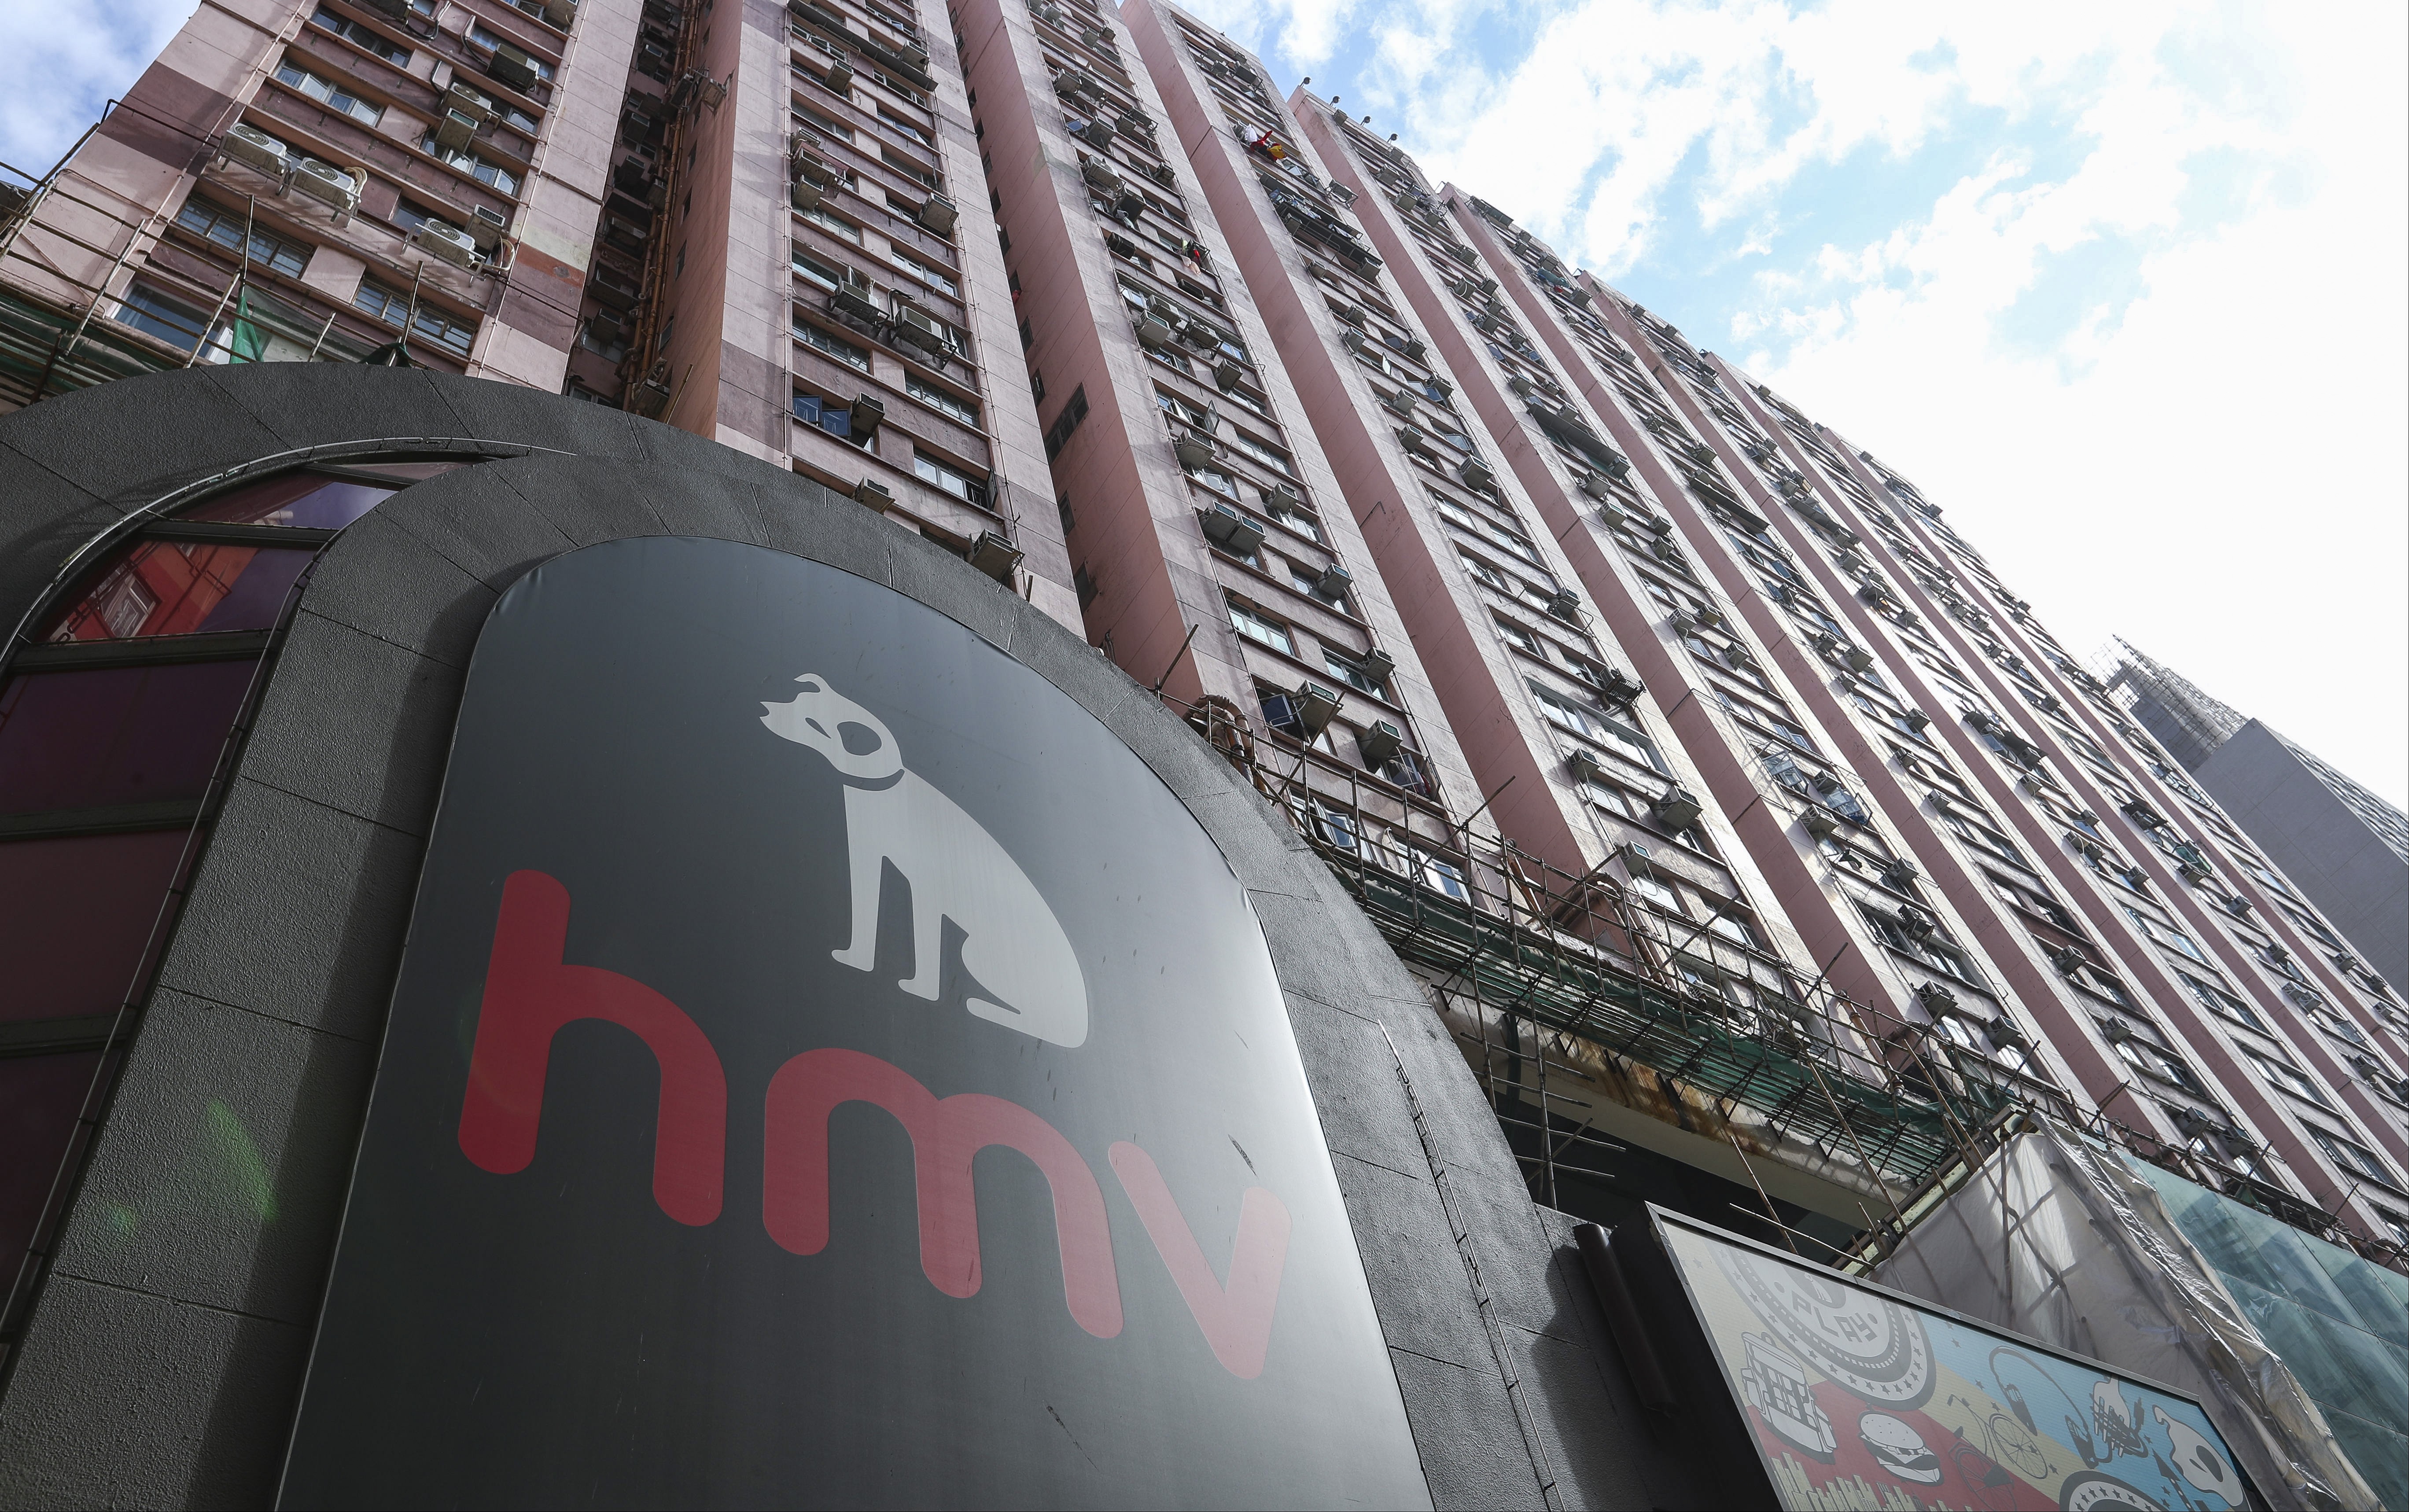 HMV’s shops have suffered years of decline as consumers turned to digital channels to buy music. Photo: Edmond So